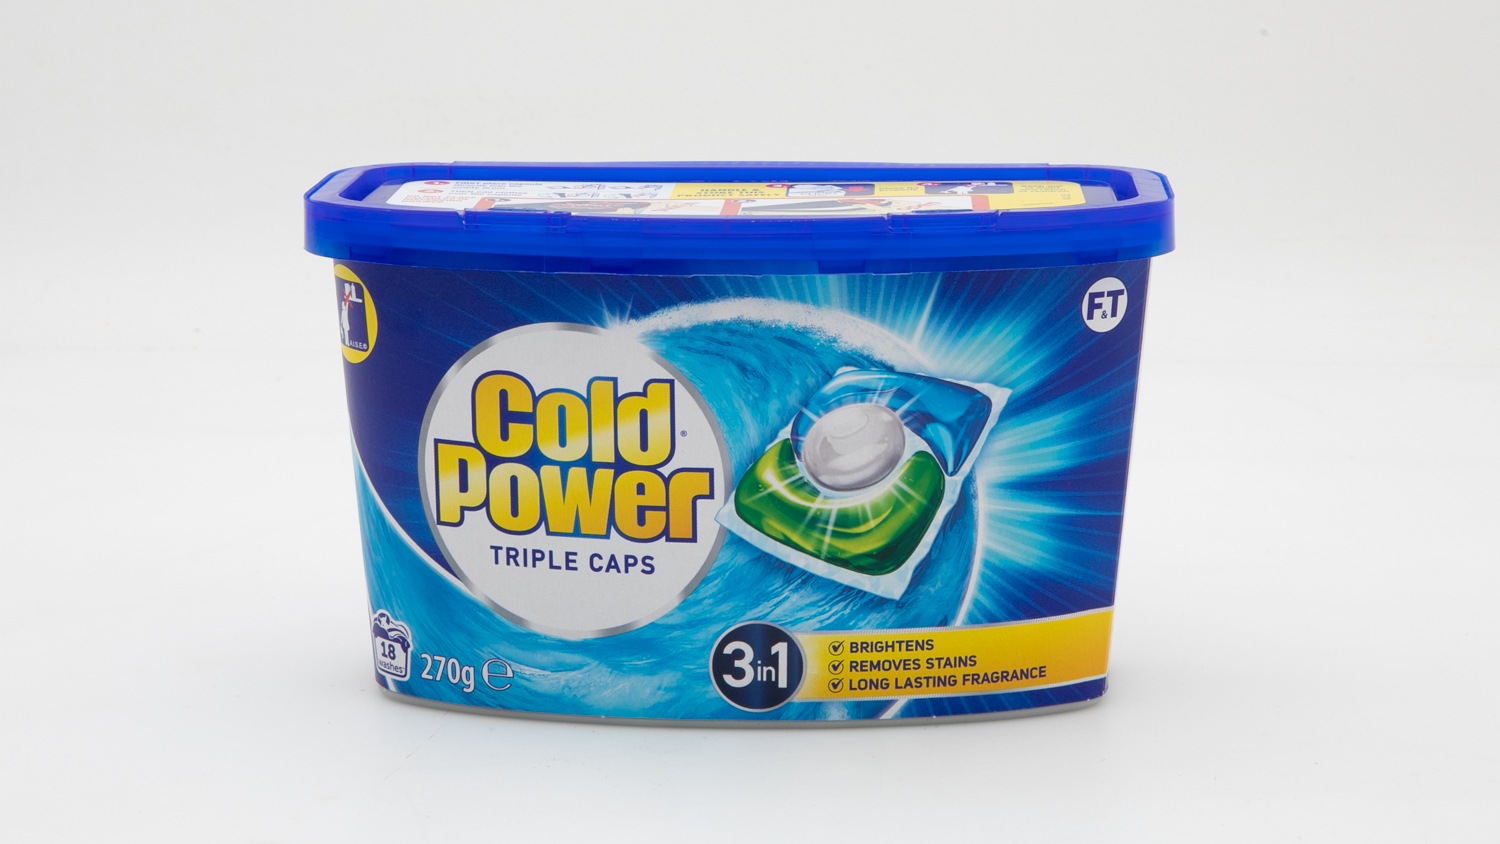 Cold Power Triple Caps 3 in 1 270g 18 capsules Front Loader carousel image